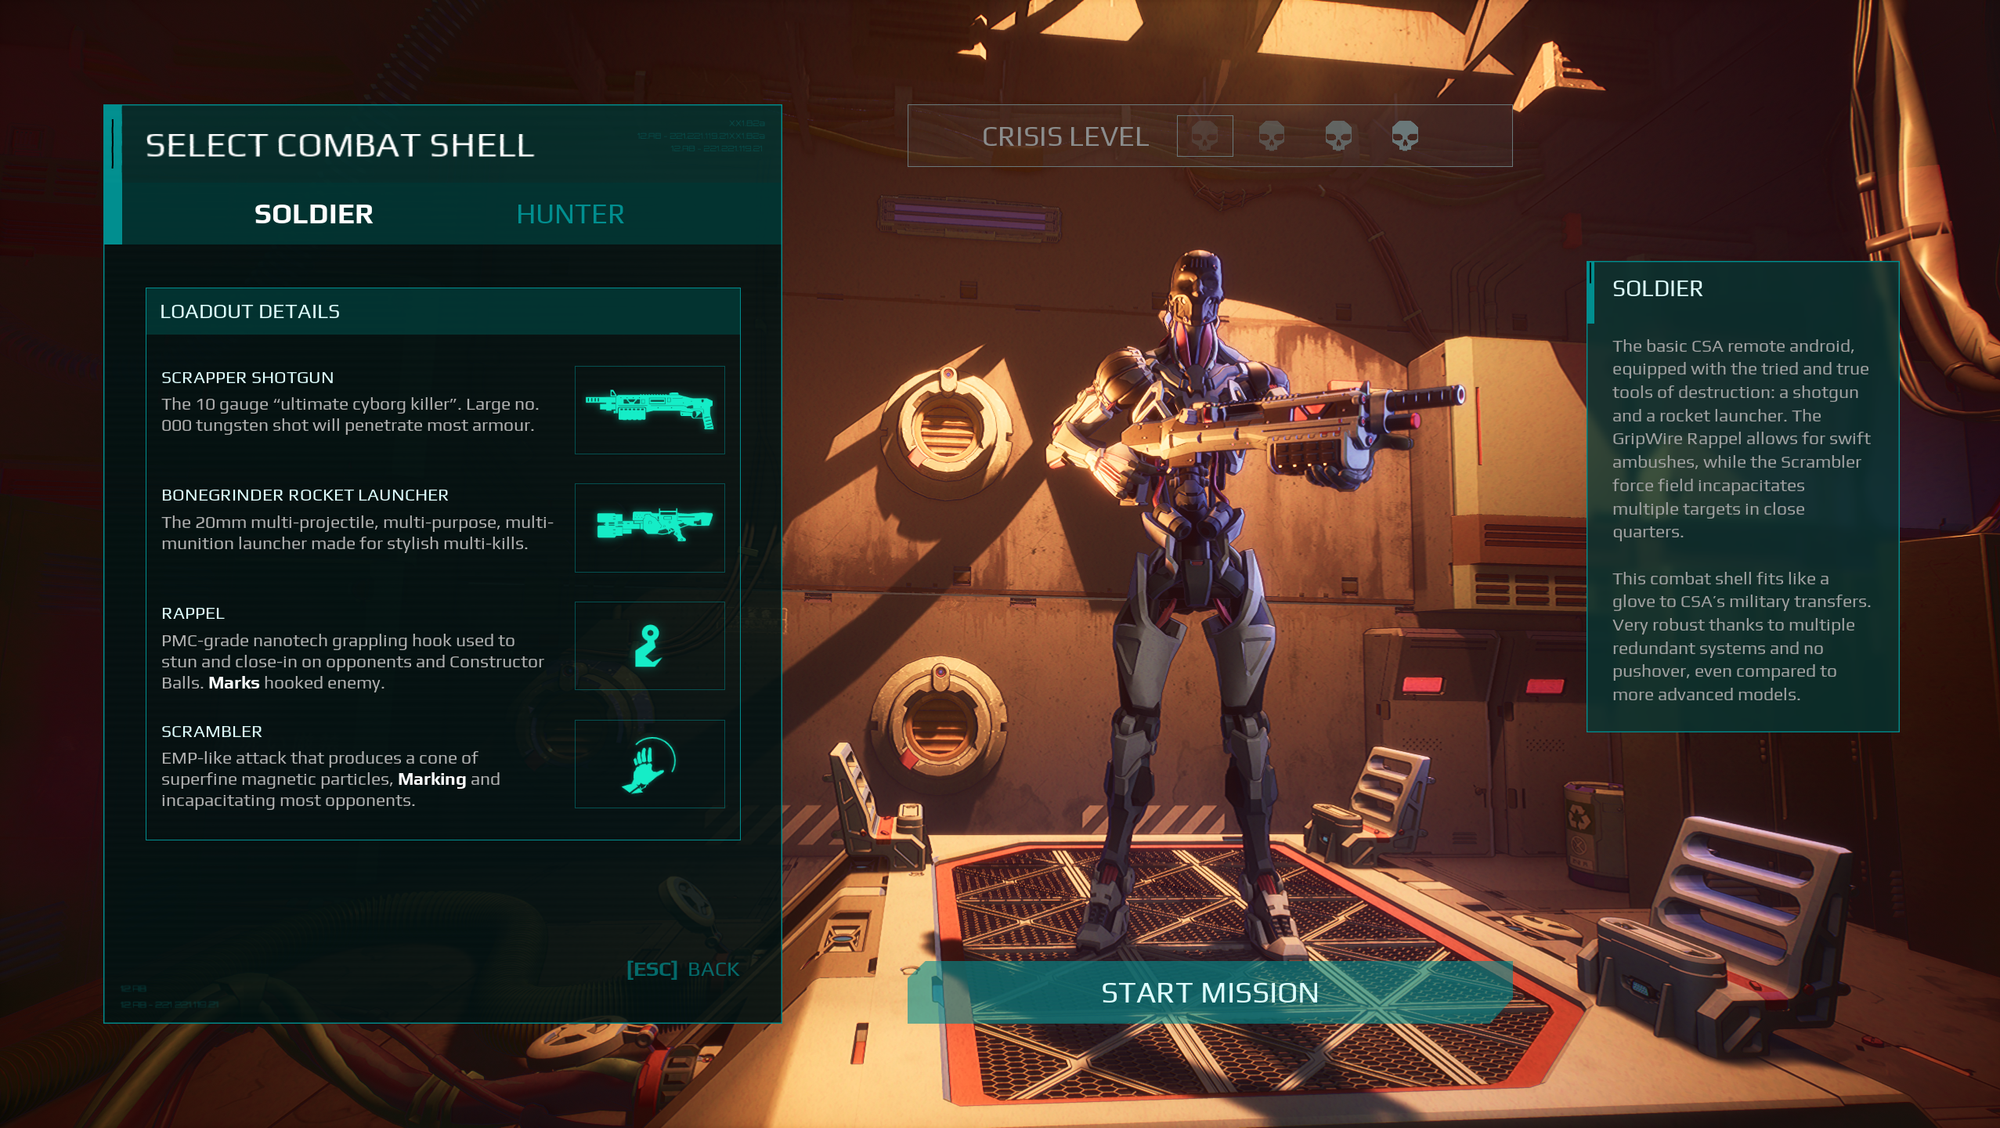 In-game screenshot detailing the Soldier combat frame